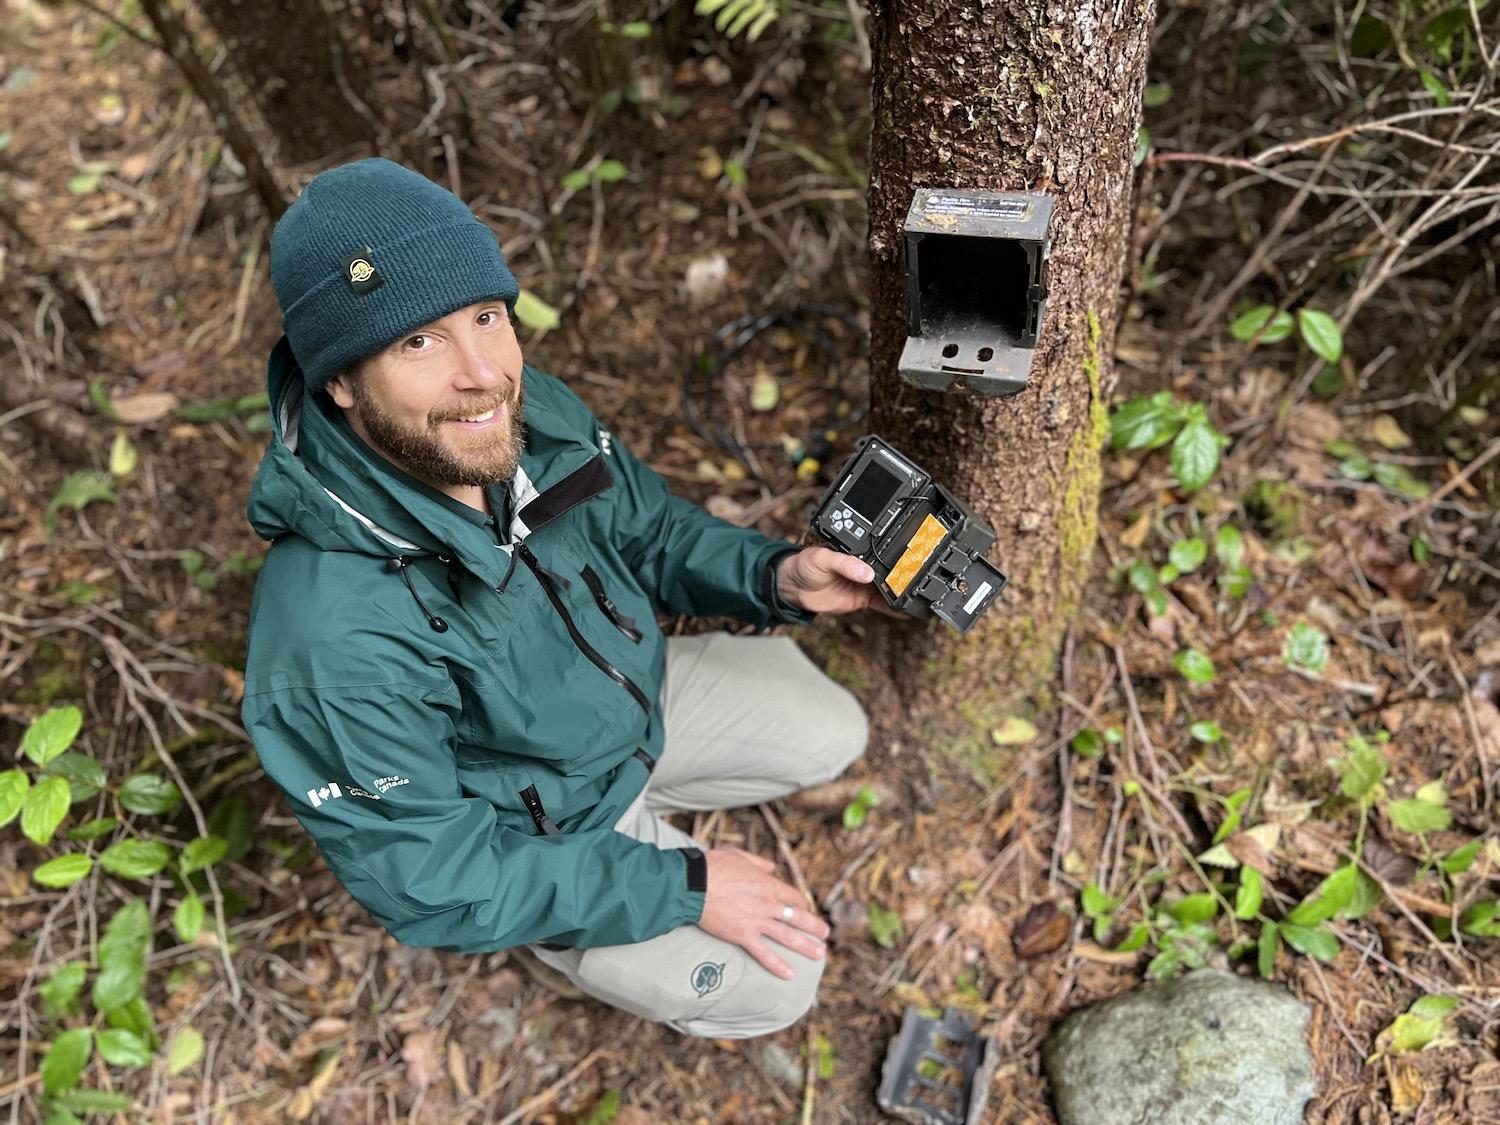 Parks Canada's Todd WIndle shows a wildlife camera that's being used to study wolves in Pacific Rim National Park Reserve.